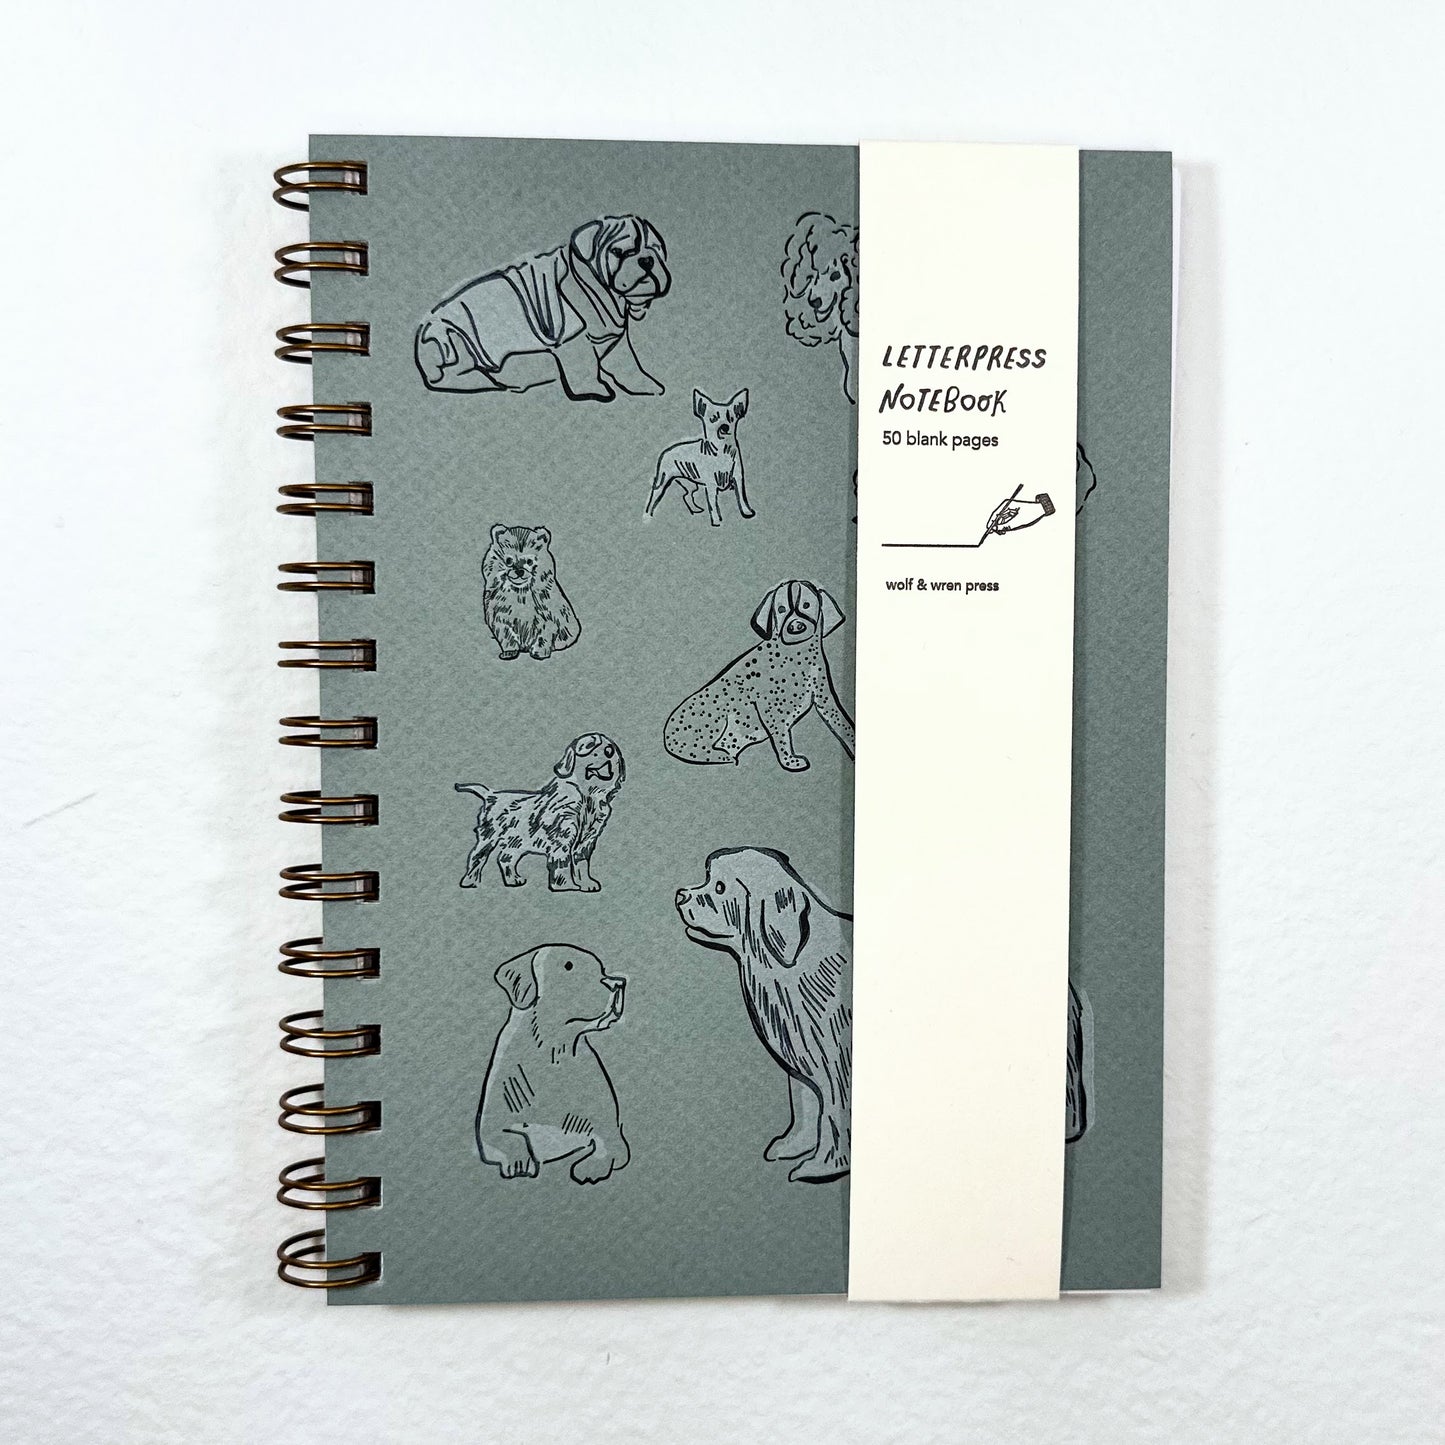 LARGE DOGS NOTEBOOK